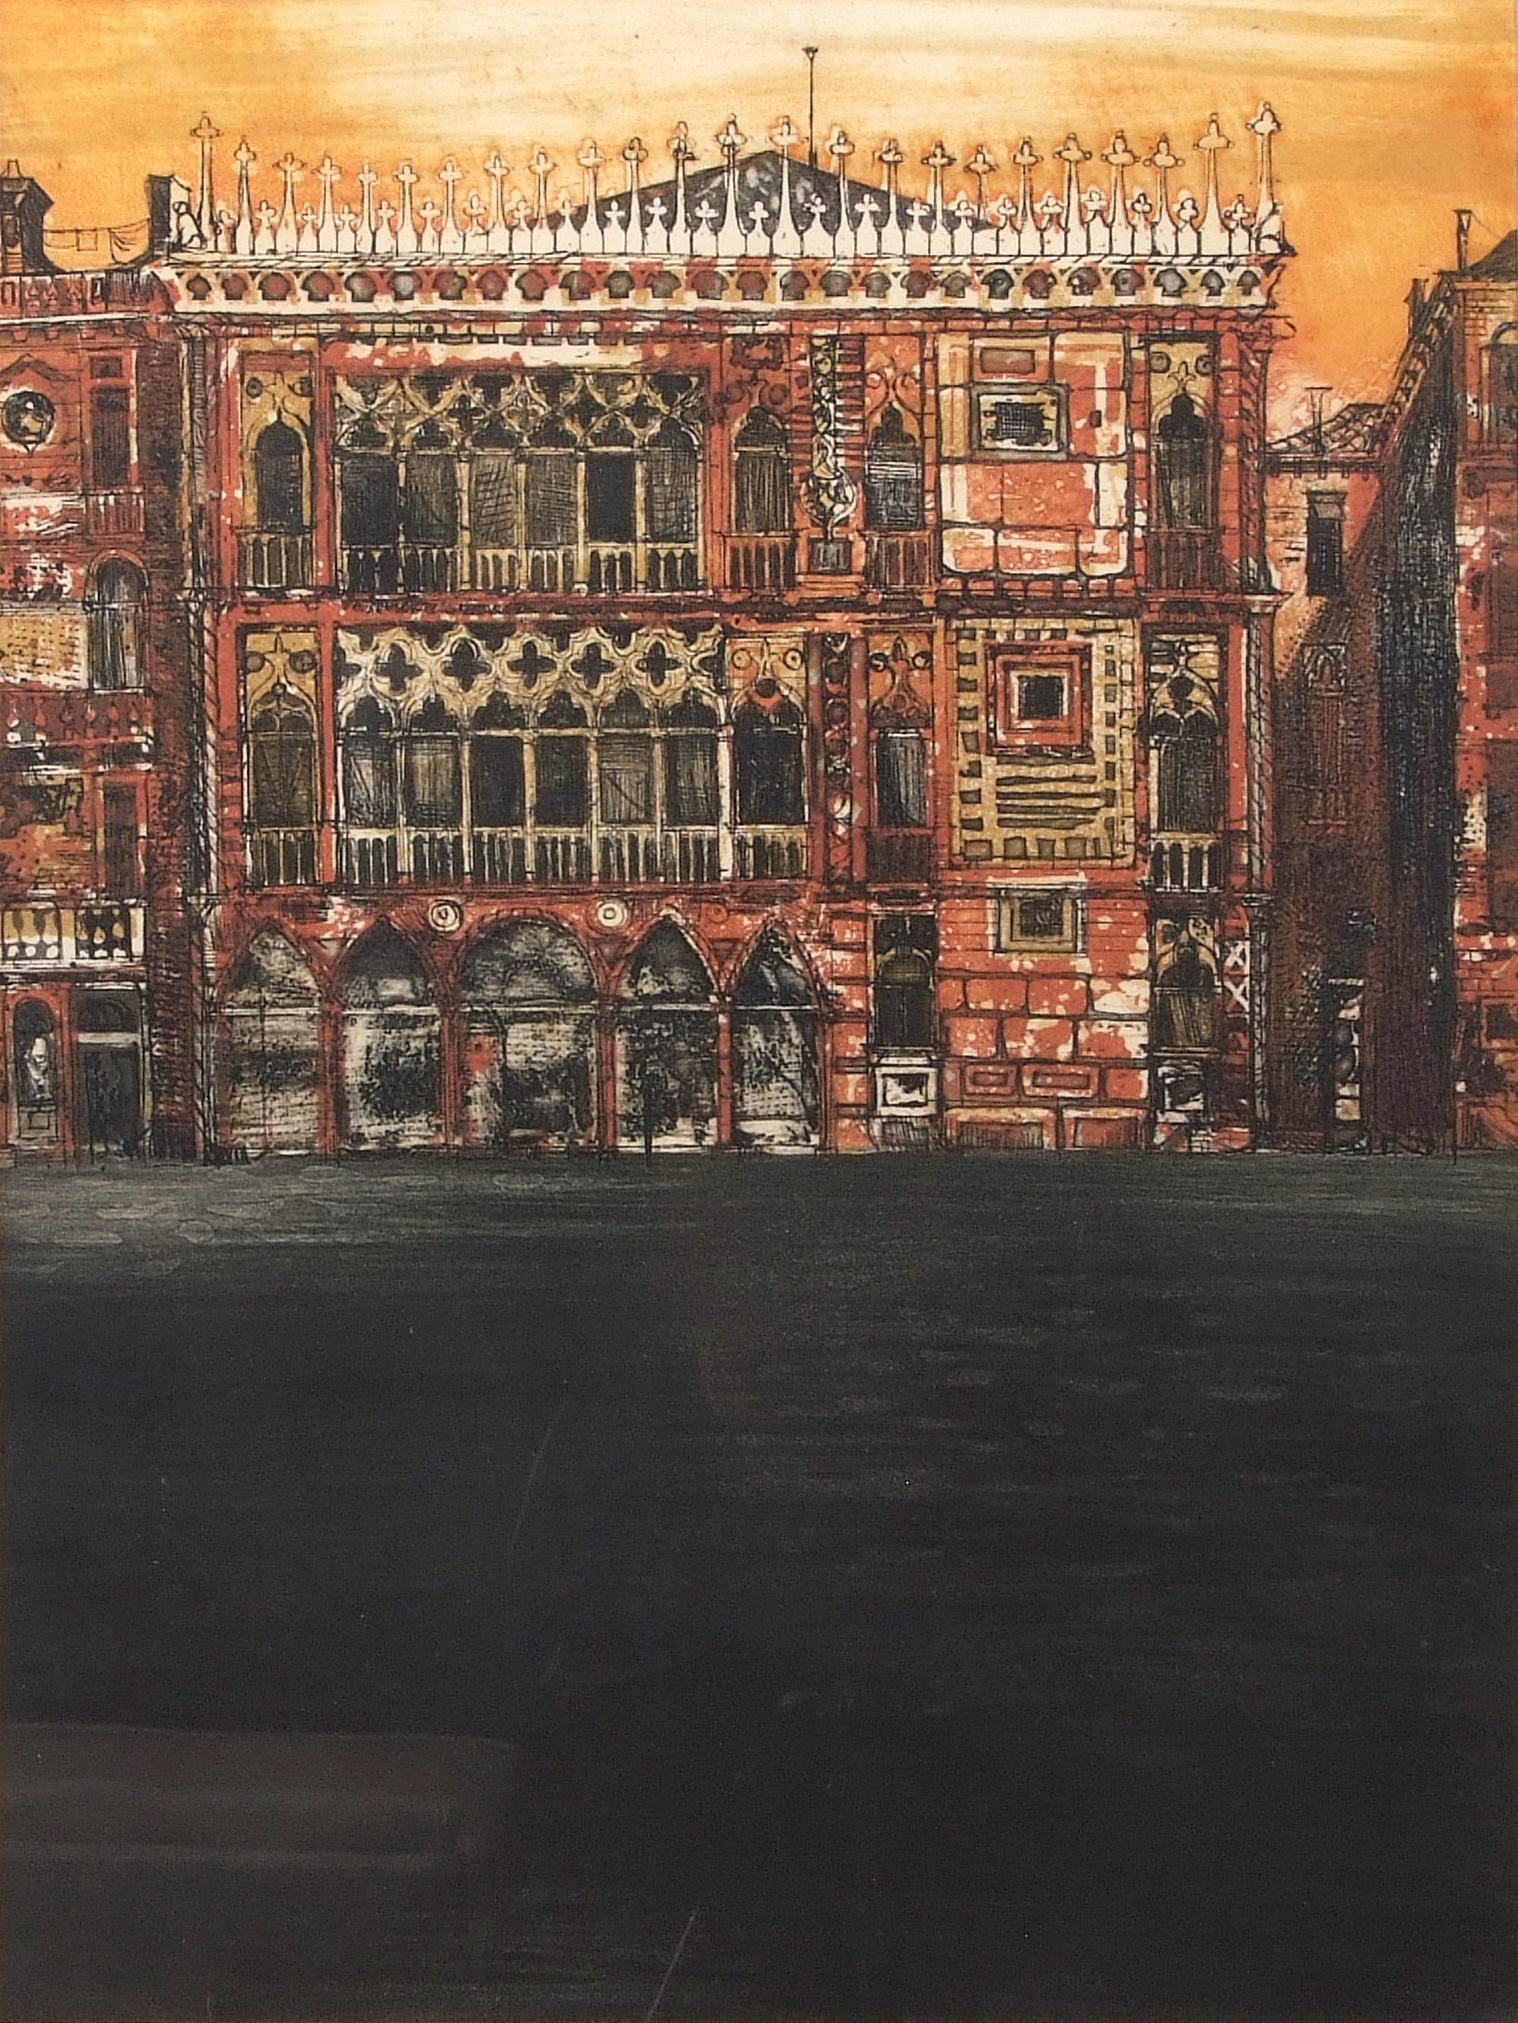 AR Richard Beer (1928-2017) "Ca'd'Oro in Venice" coloured etching, signed under mount, 60 x 44cm